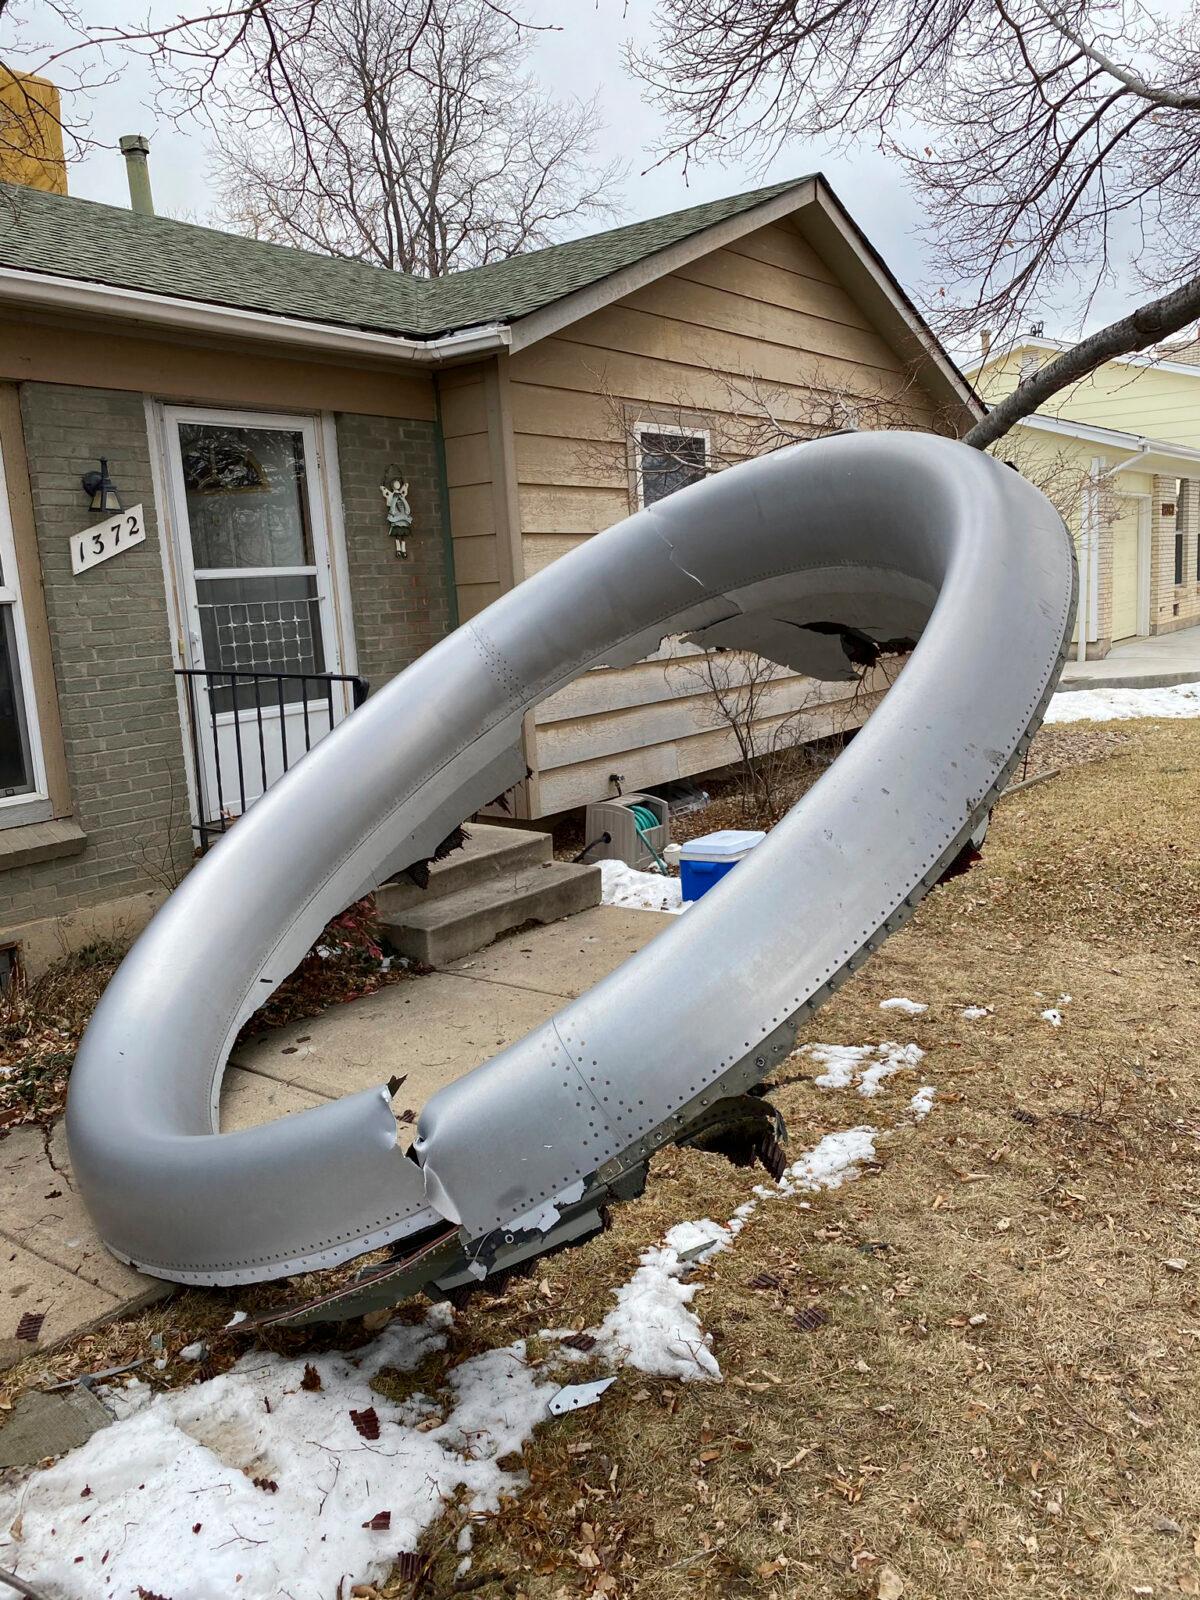 Debris is scattered in the front yard of a house at near 13th and Elmwood, in Broomfield, Colo., on Feb. 20, 2021. (Broomfield Police Department via AP)